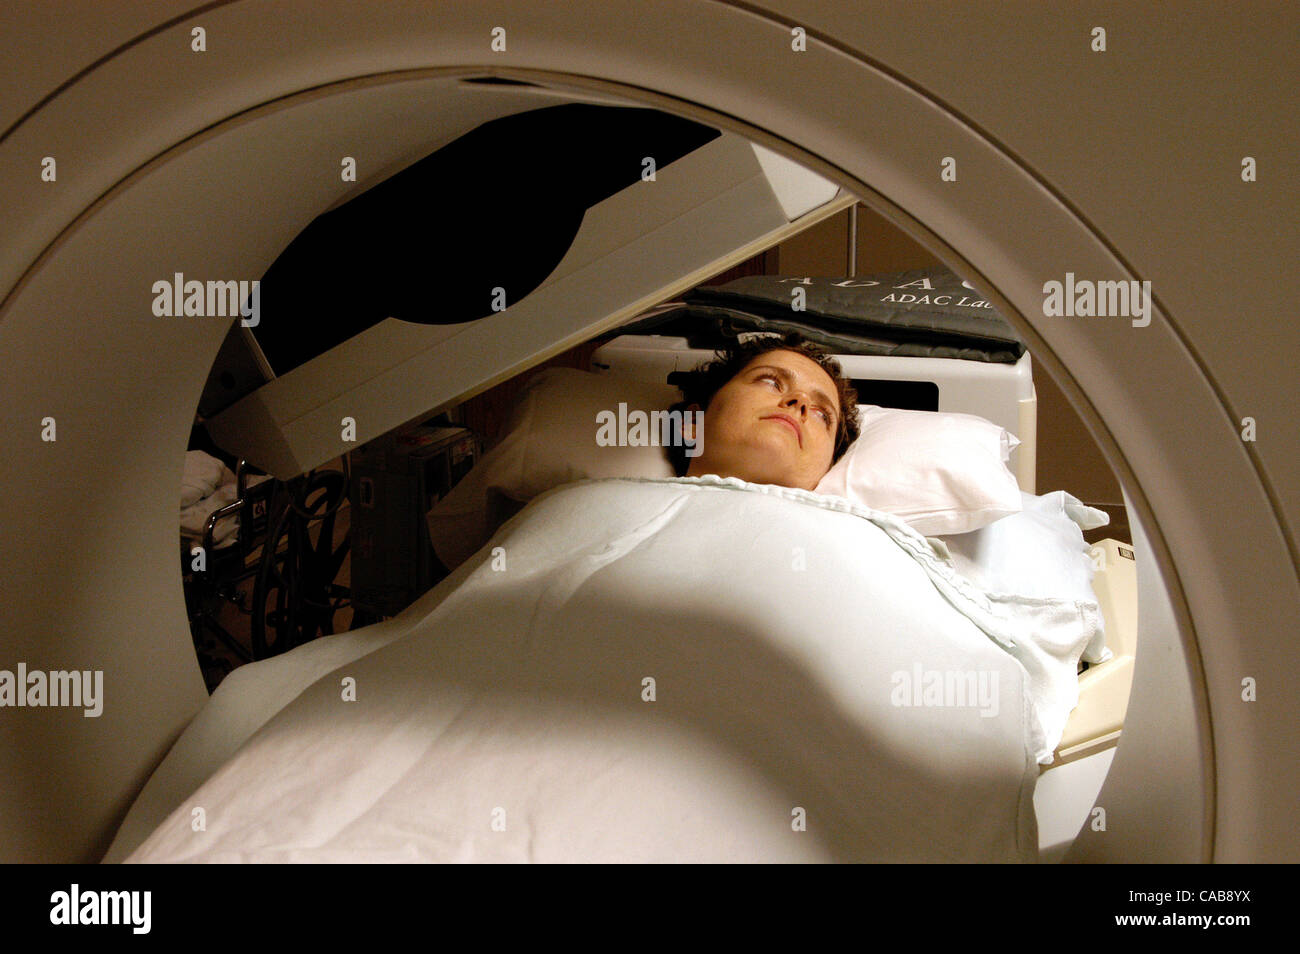 May 25, 2004; Marietta, GA, USA; Lung cancer patient JULIE GILMORE, 36, has a bone scan in the nuclear medicine department of Marietta Hospital. Stock Photo